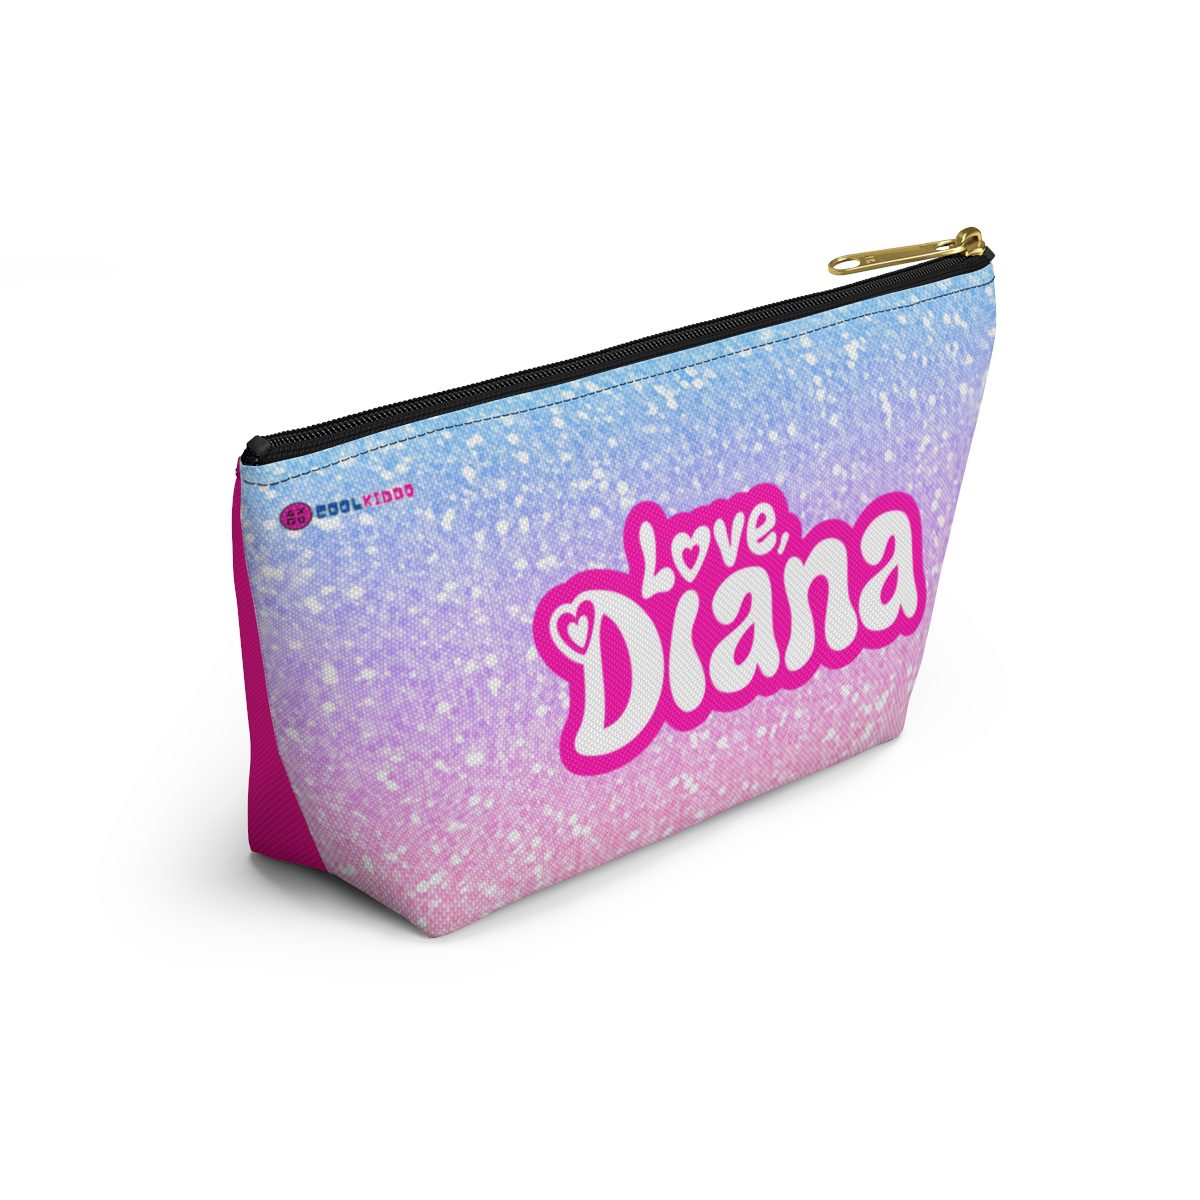 Love Diana Show YouTube Channel Accessory Pouch Cool Kiddo 28